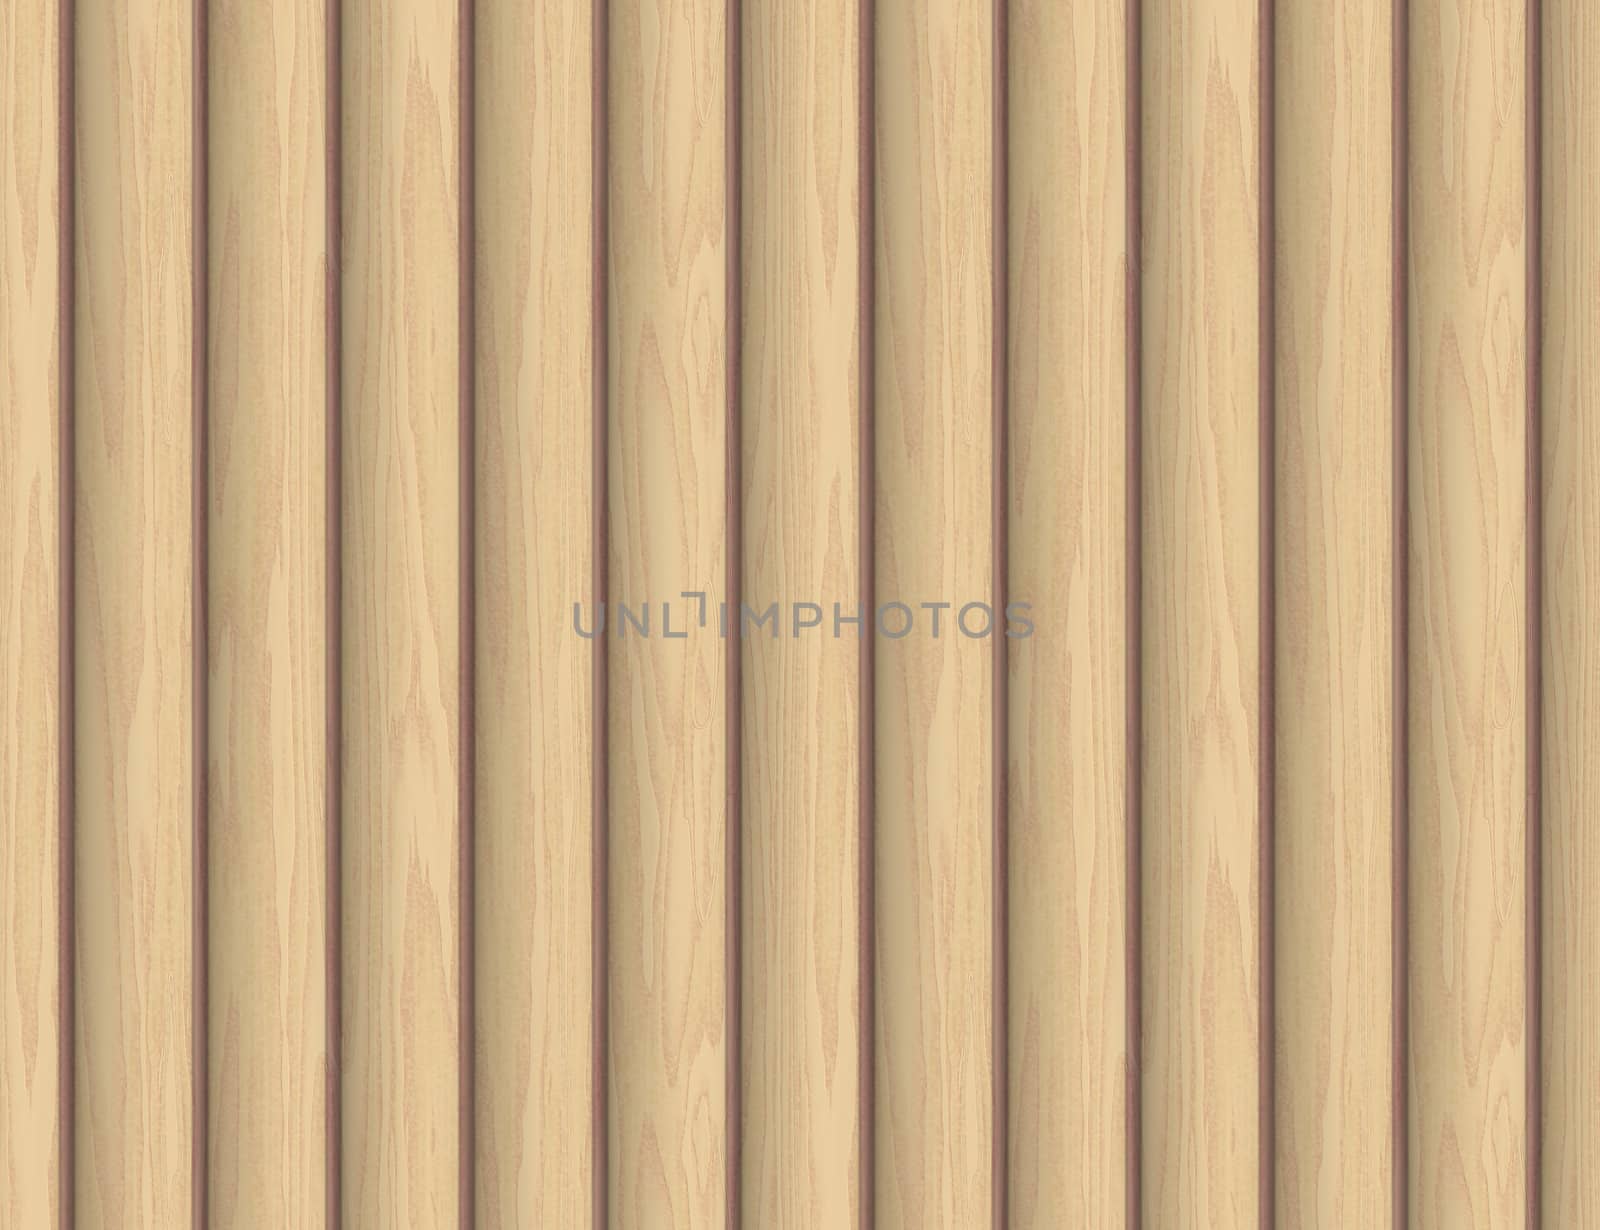 background image of nice pine wooden panels